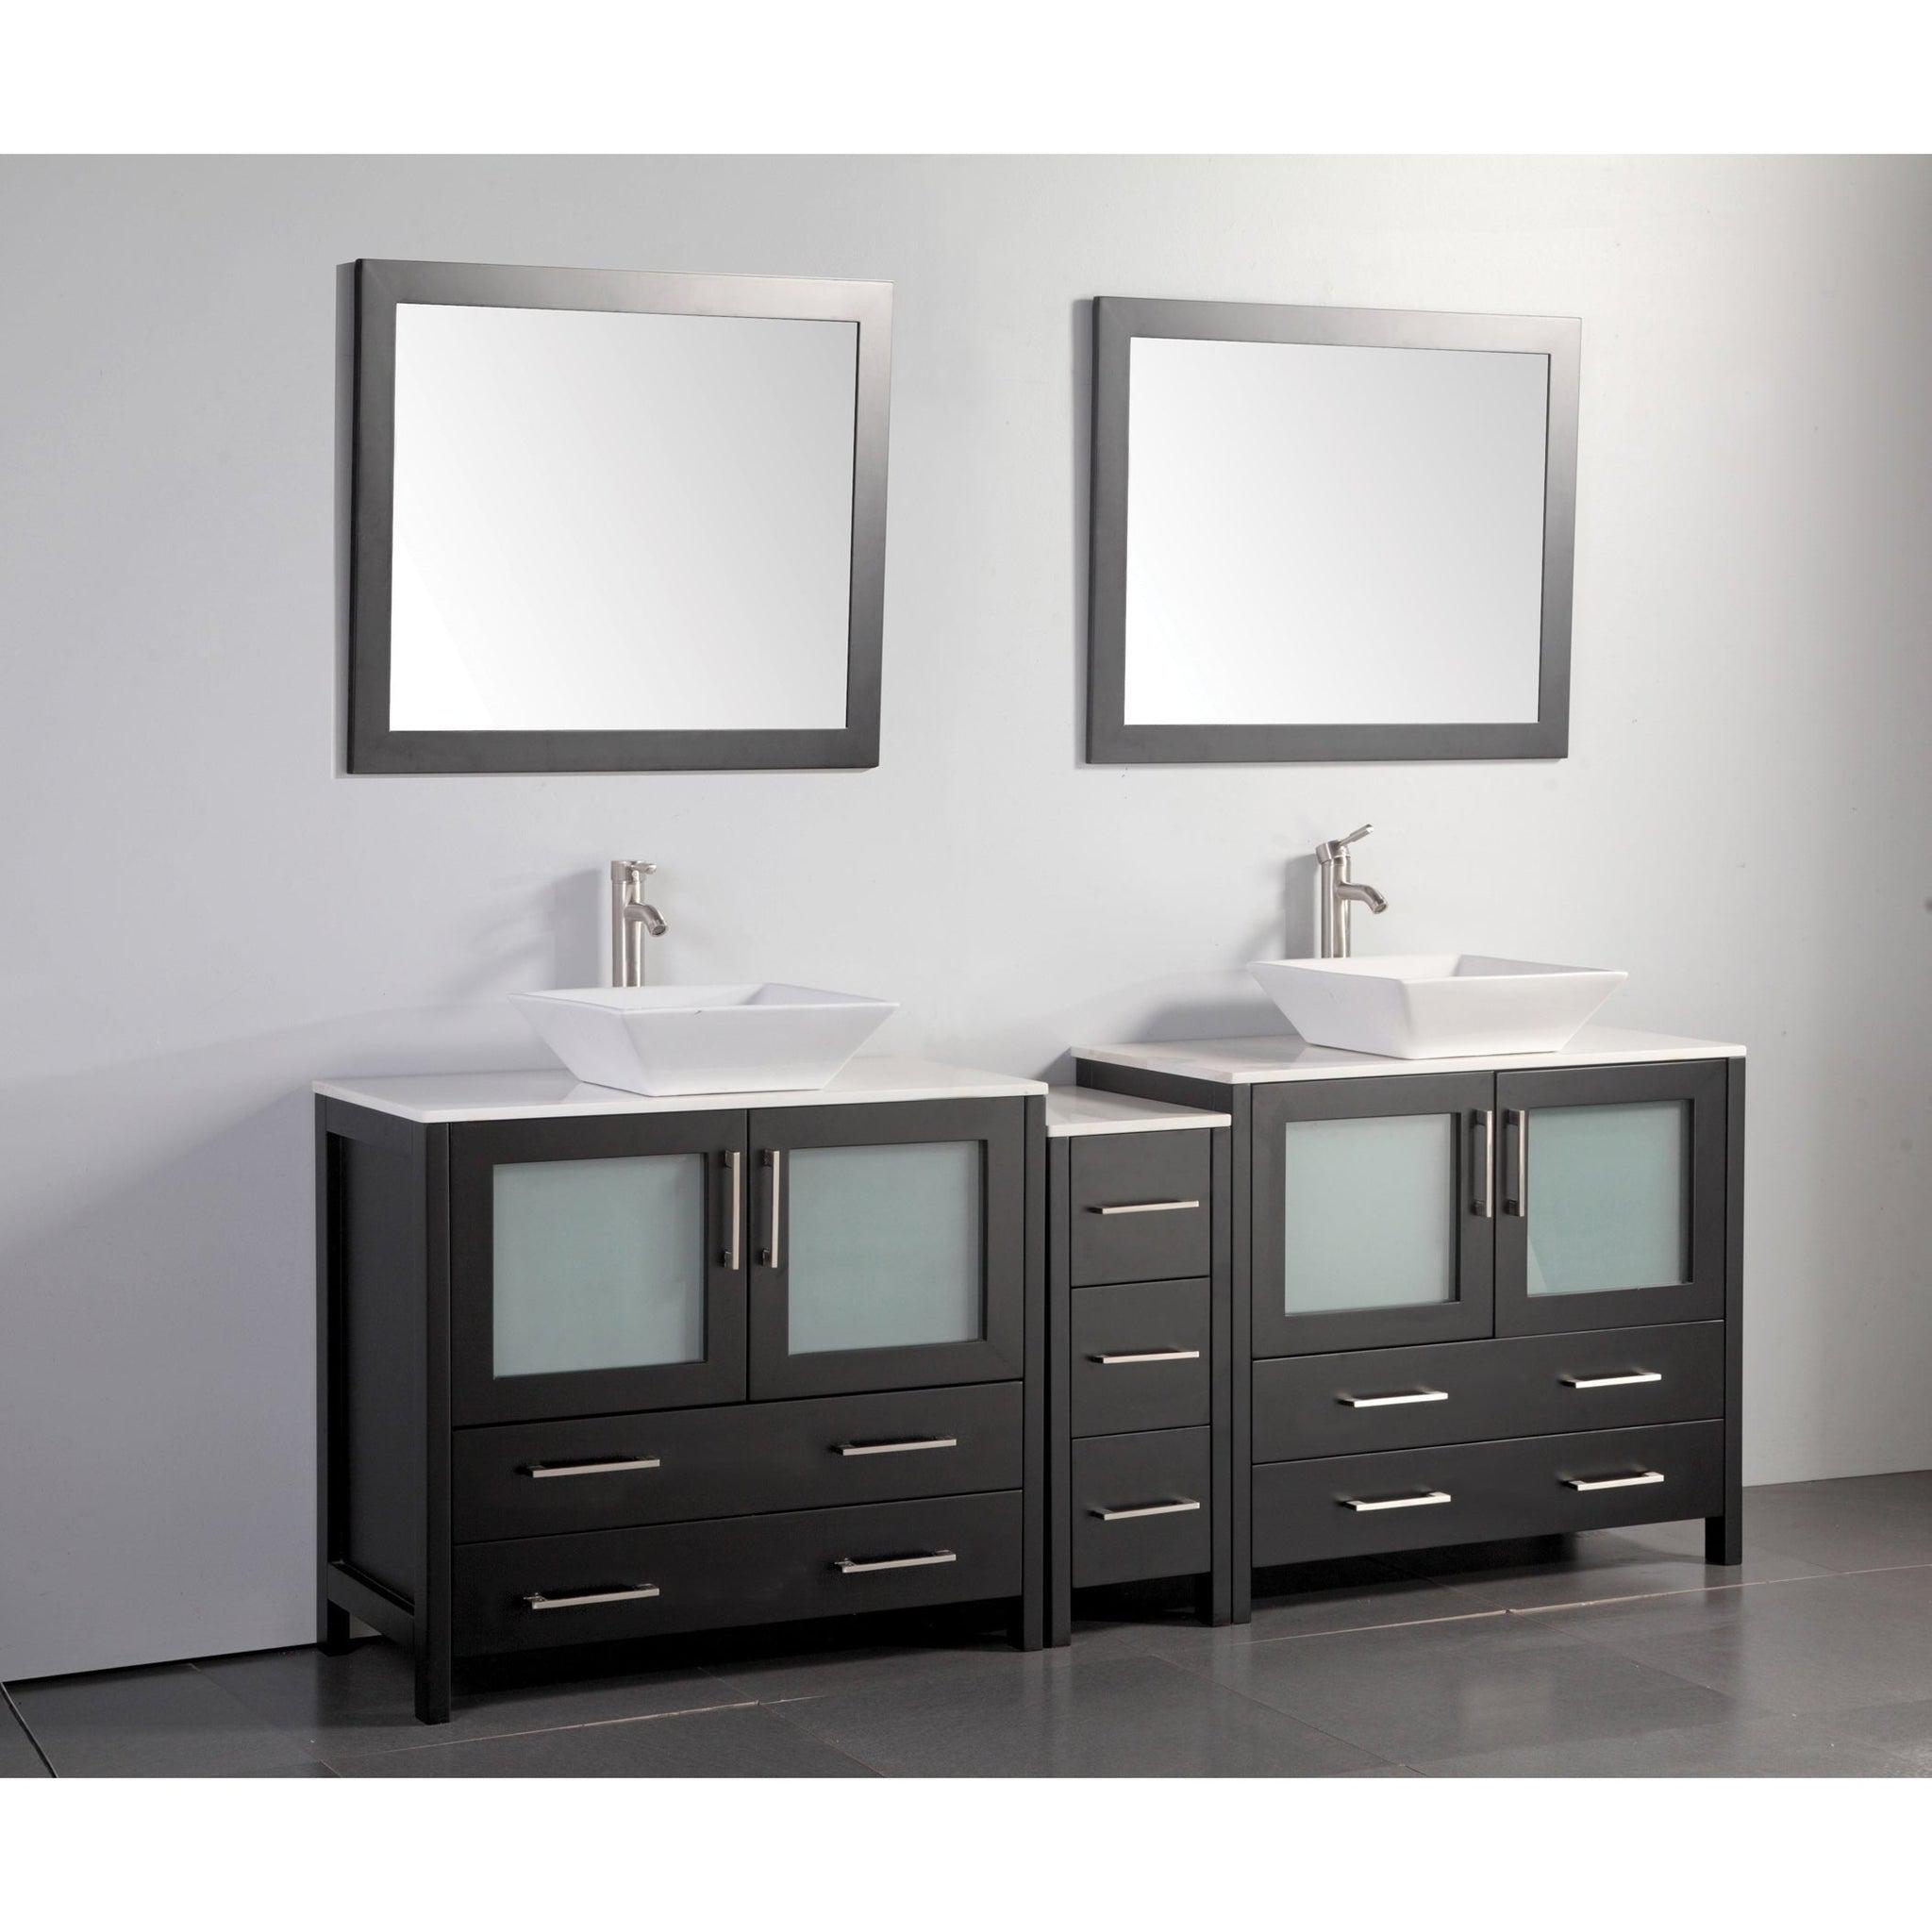 Vanity Art Ravenna 96 Double Gray Freestanding Vanity Set With White  Engineered Marble Top, 2 Ceramic Vessel Sinks, 2 Side Cabinets and 2 Mirrors